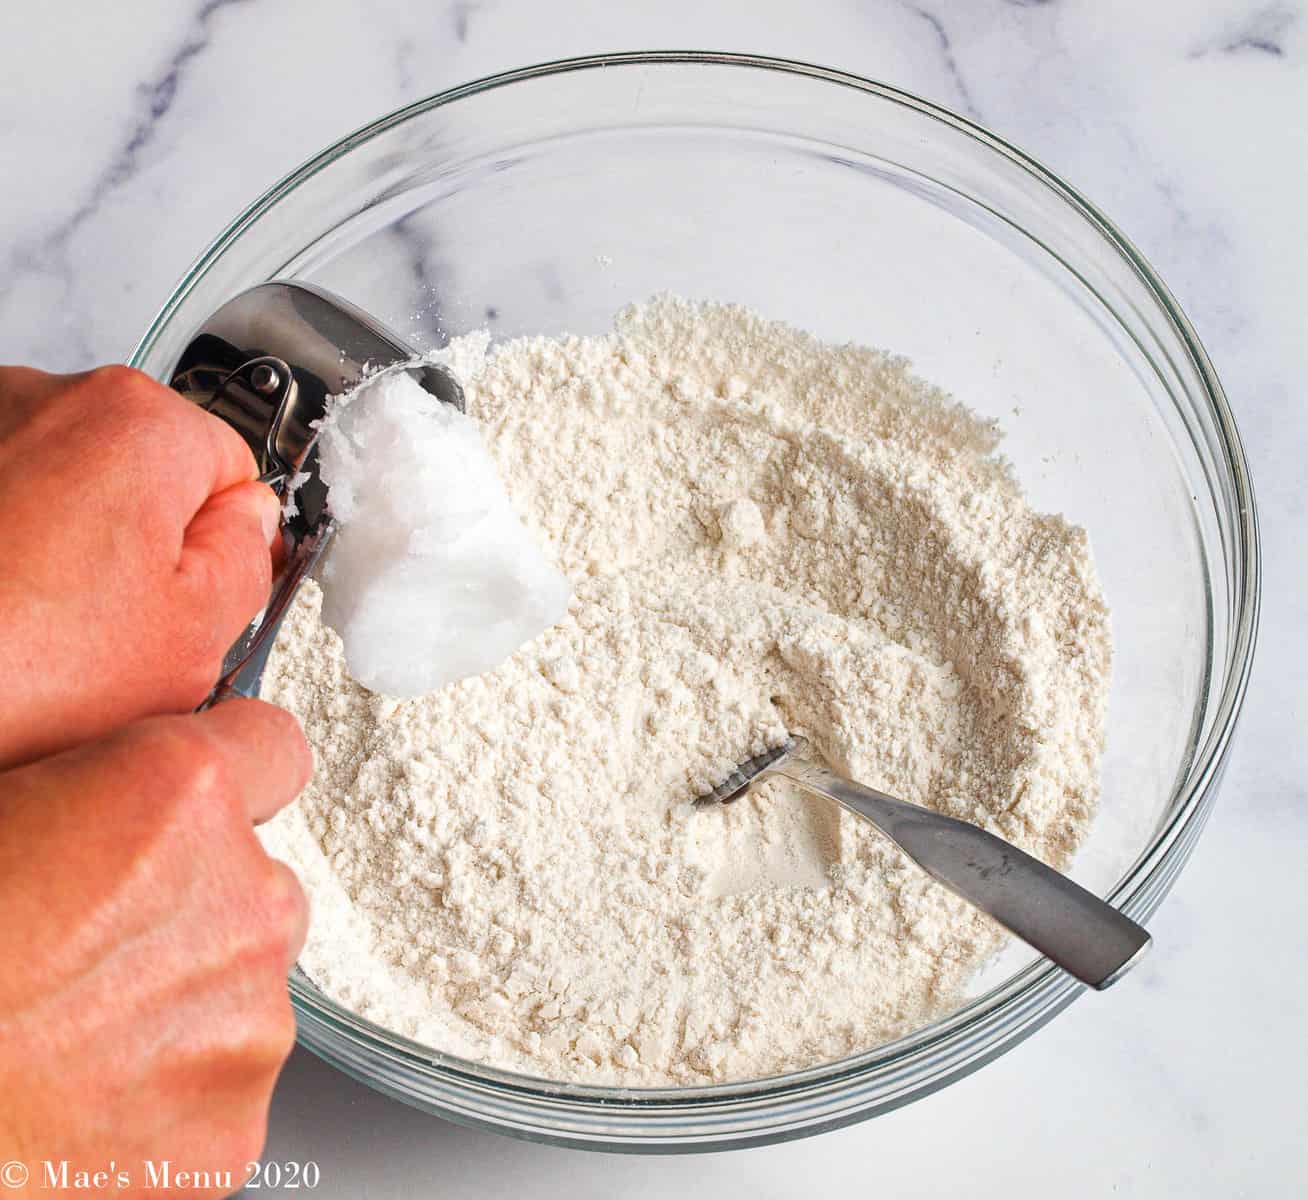 Pouring coconut oil into the flour